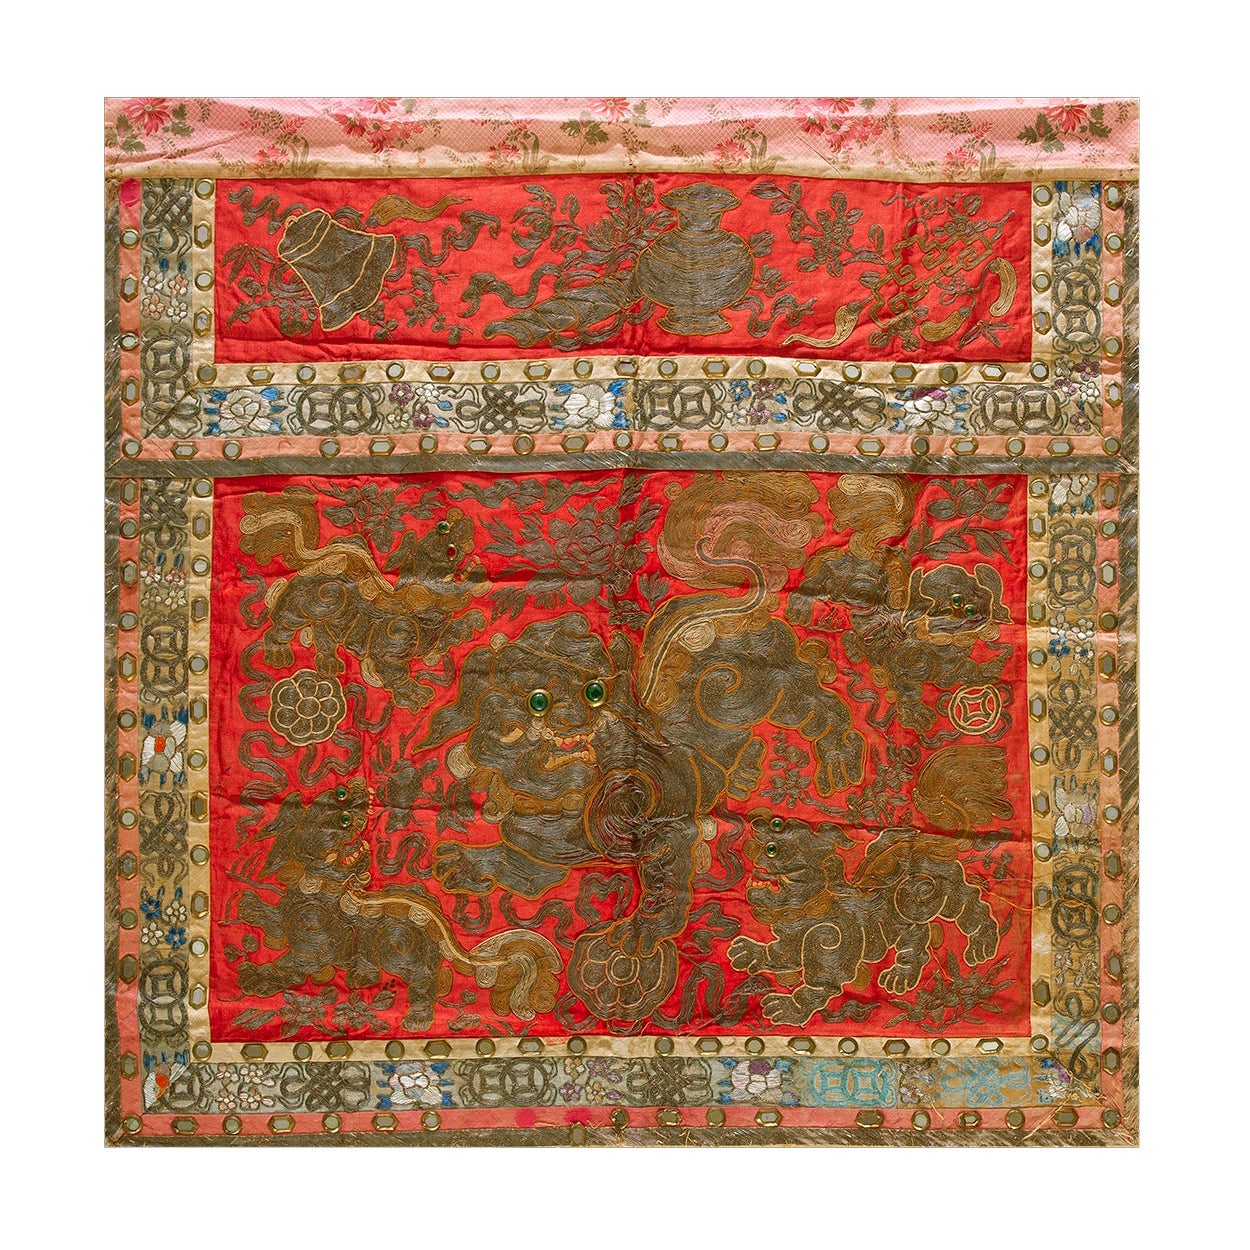 Early 20th Century Chinese Silk Embroidery ( 3' x 3' x 92 x 92 )